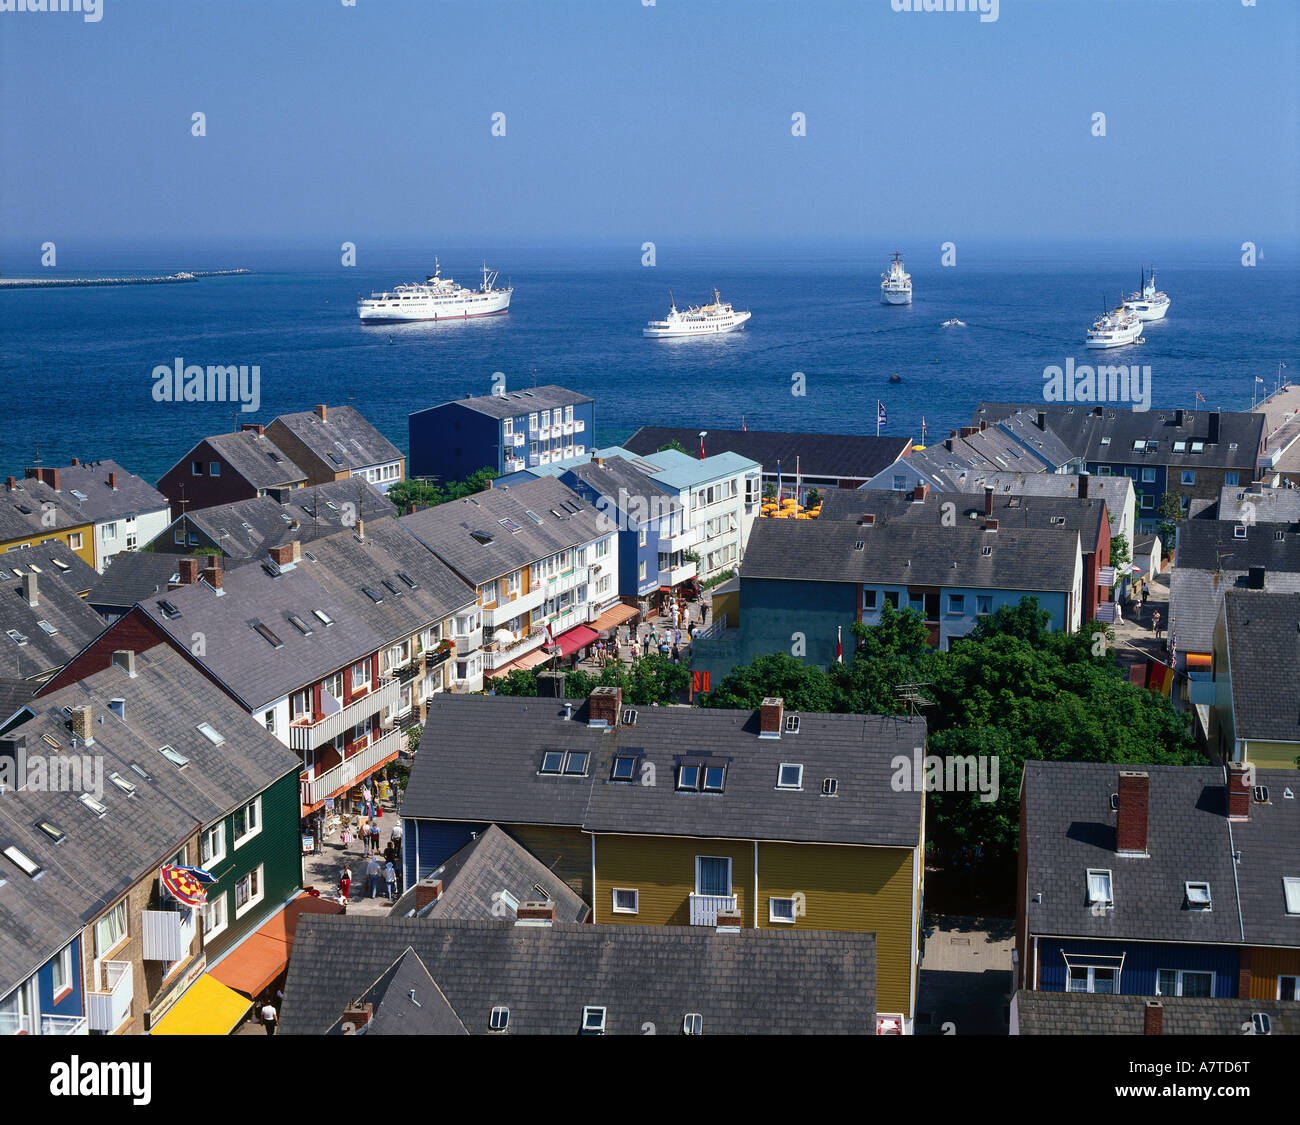 Ships in harbor, BRD. Northern sea, Helgoland, Germany Stock Photo